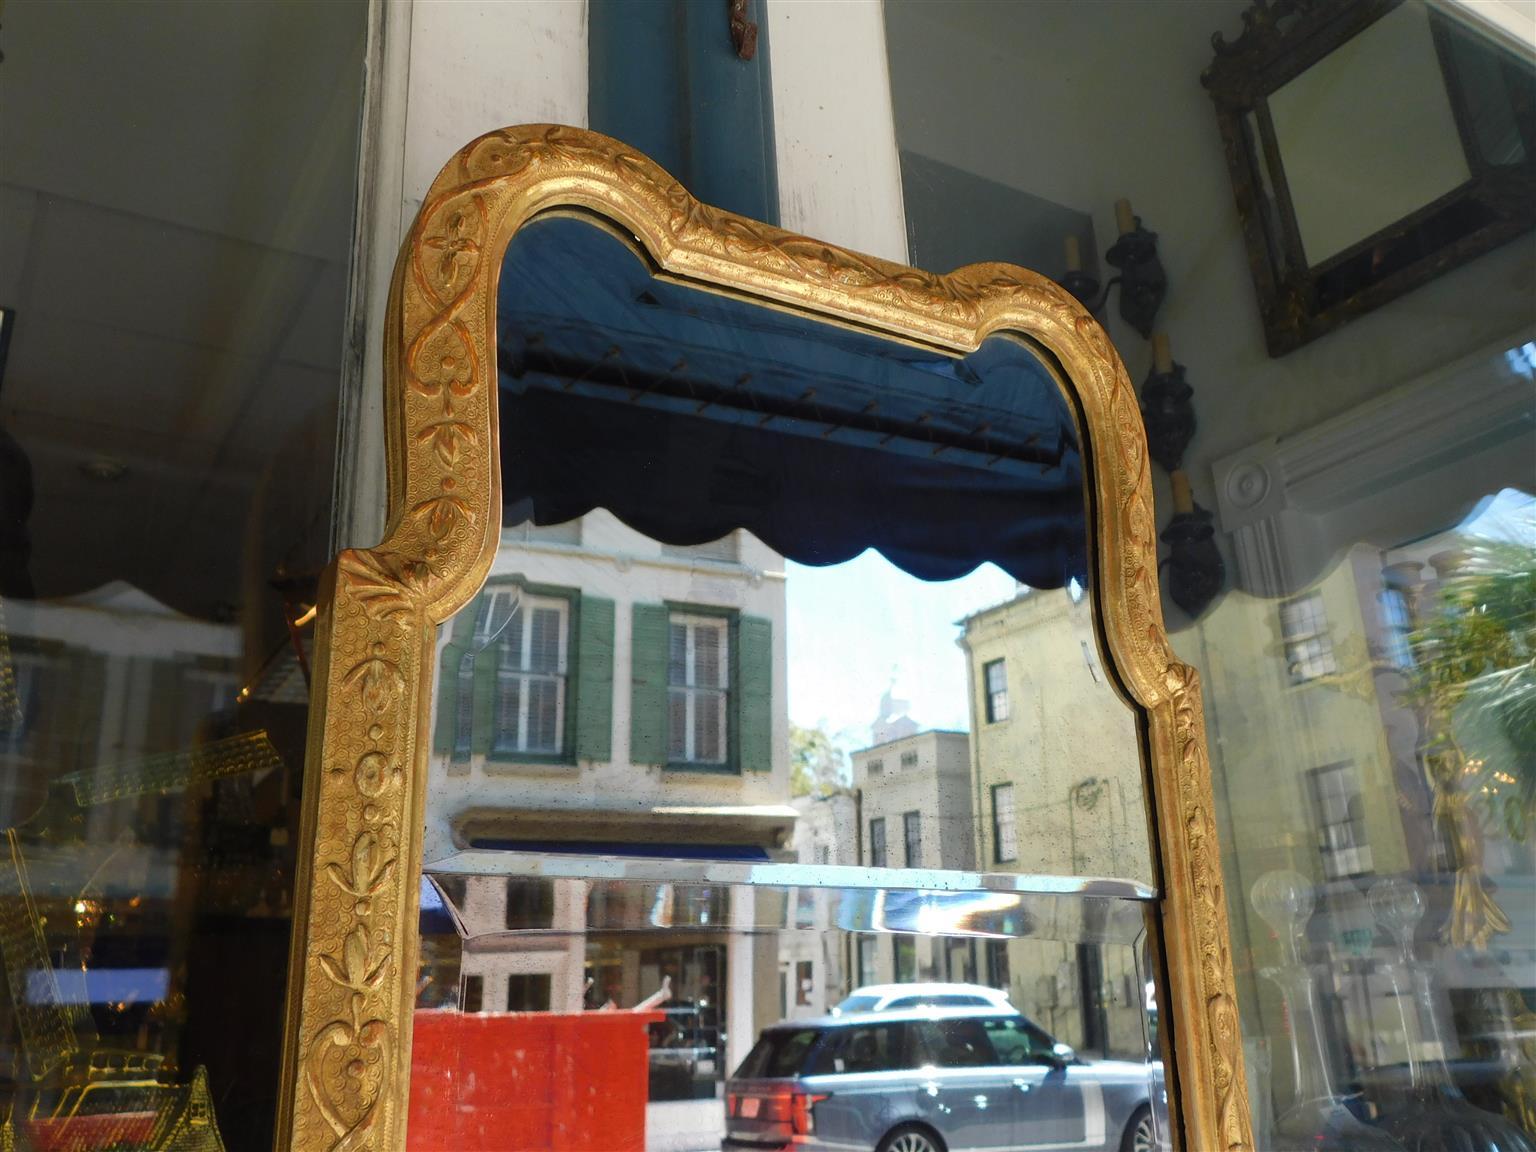 Mid-18th Century English Queen Anne Gilt Wood and Gesso Wall Mirror with Original Glass, C. 1750